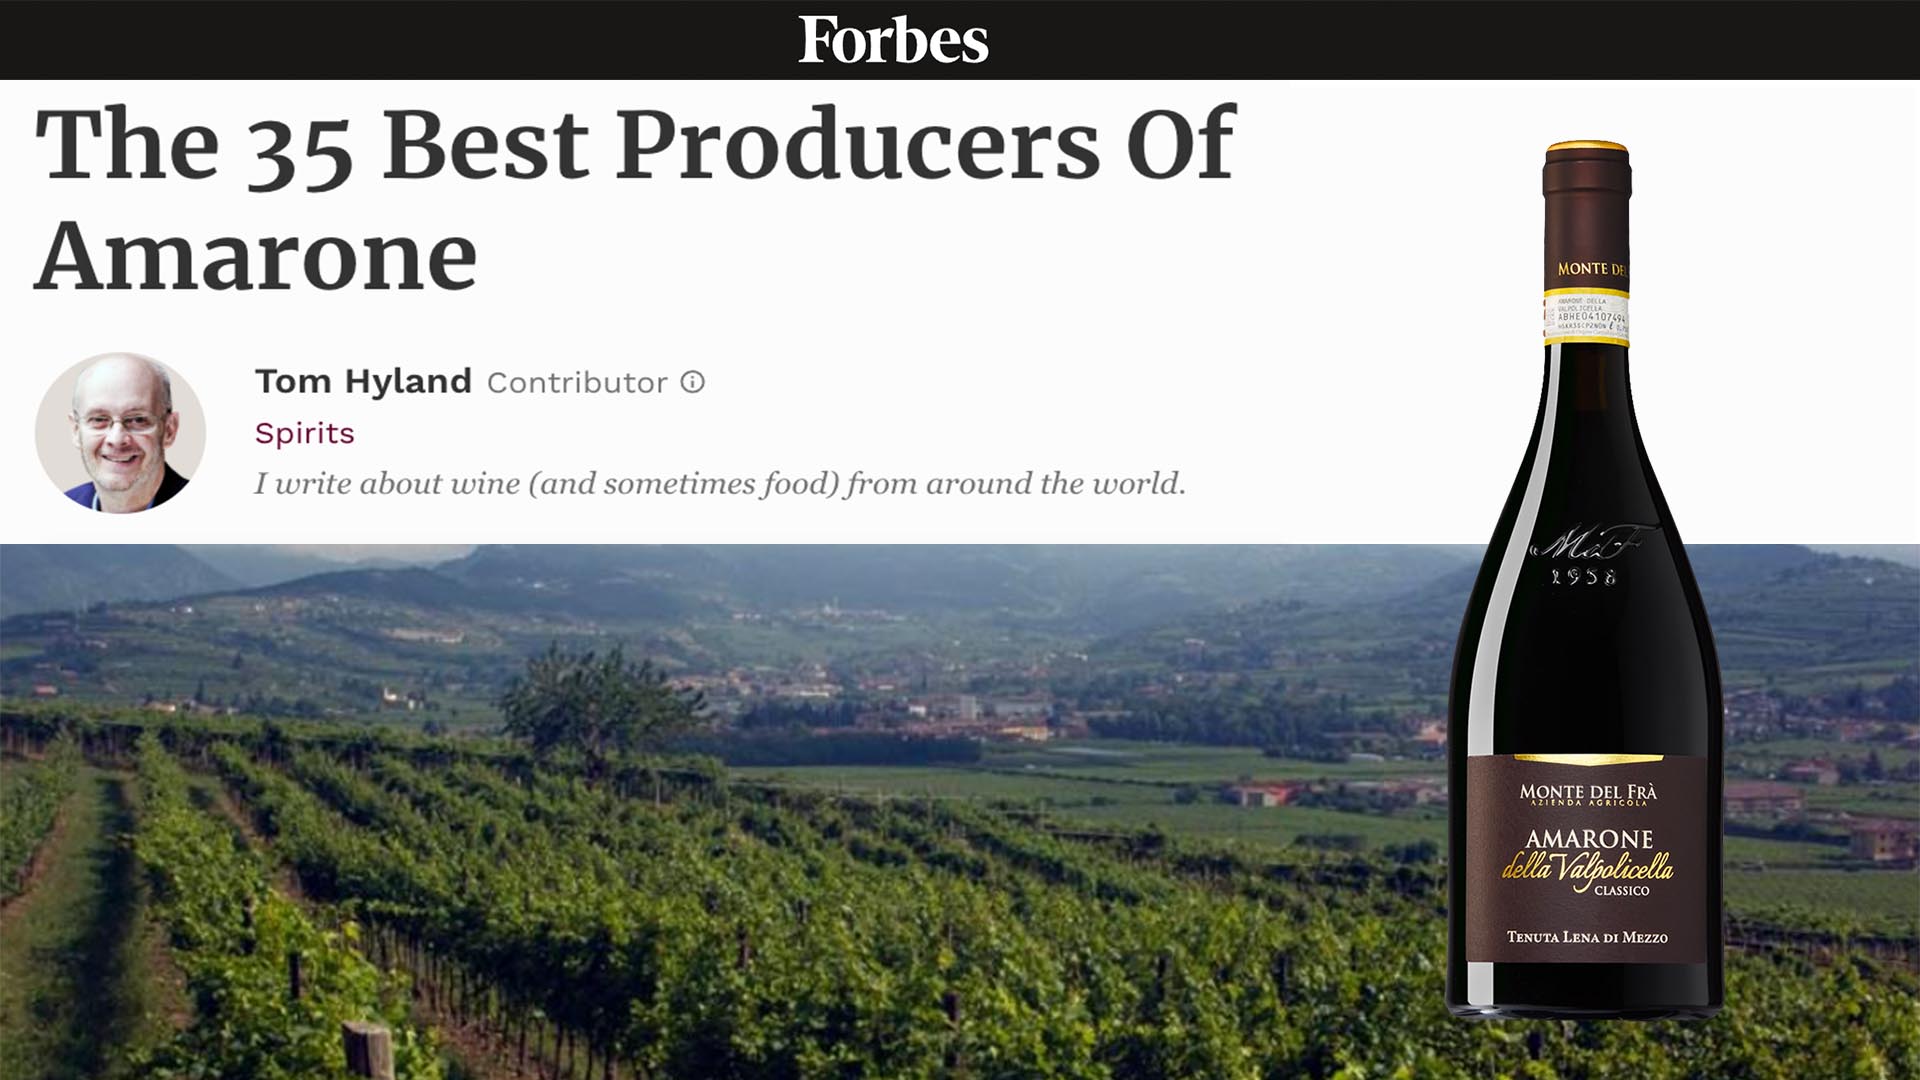 Monte del Fra’ among the 35 Best Producers Of Amarone